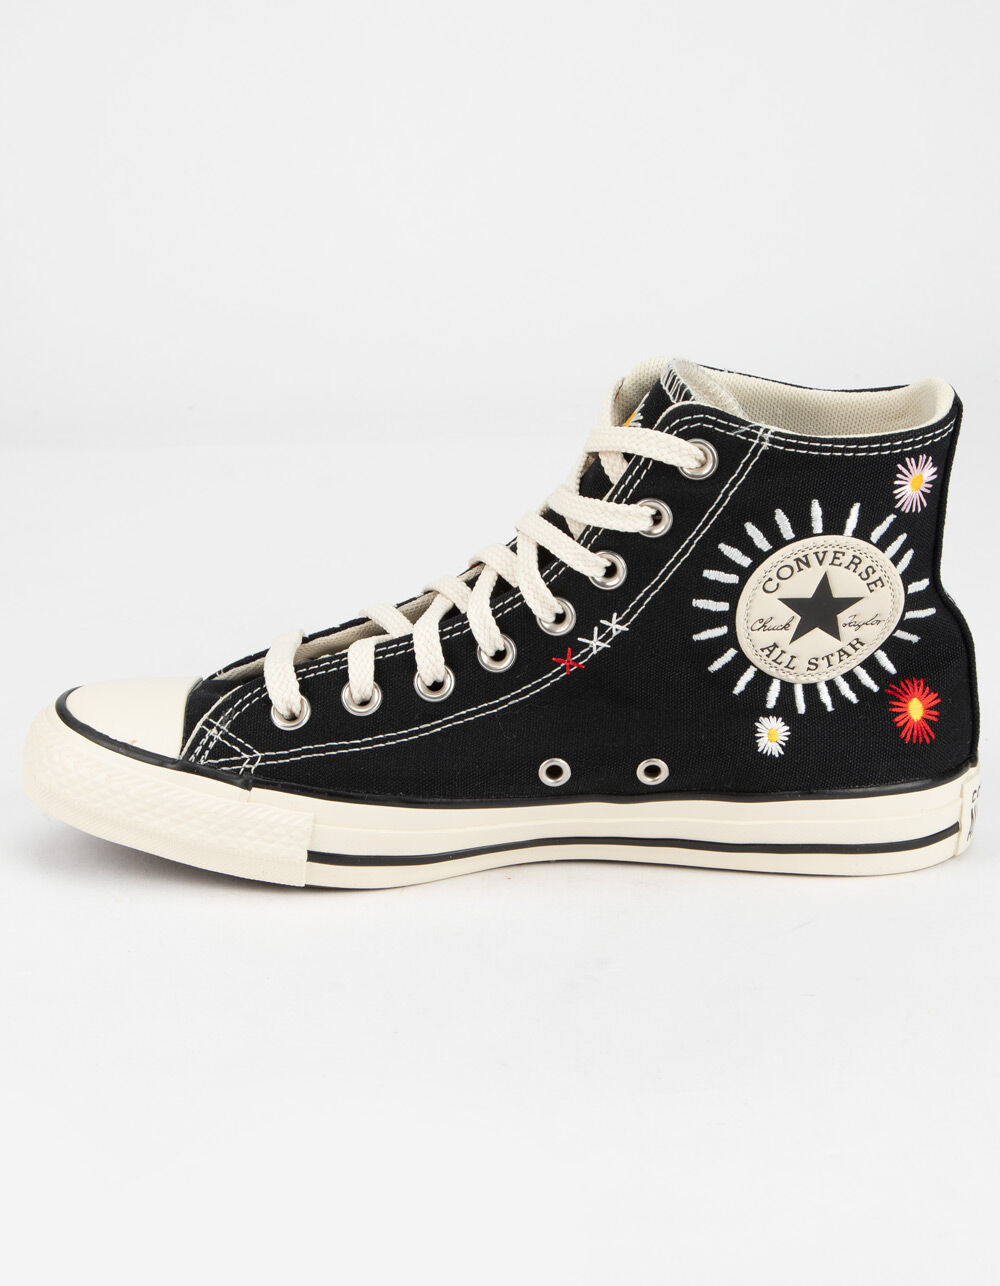 CONVERSE Embroidered Floral Chuck Taylor All Star Womens High Top Shoes ...